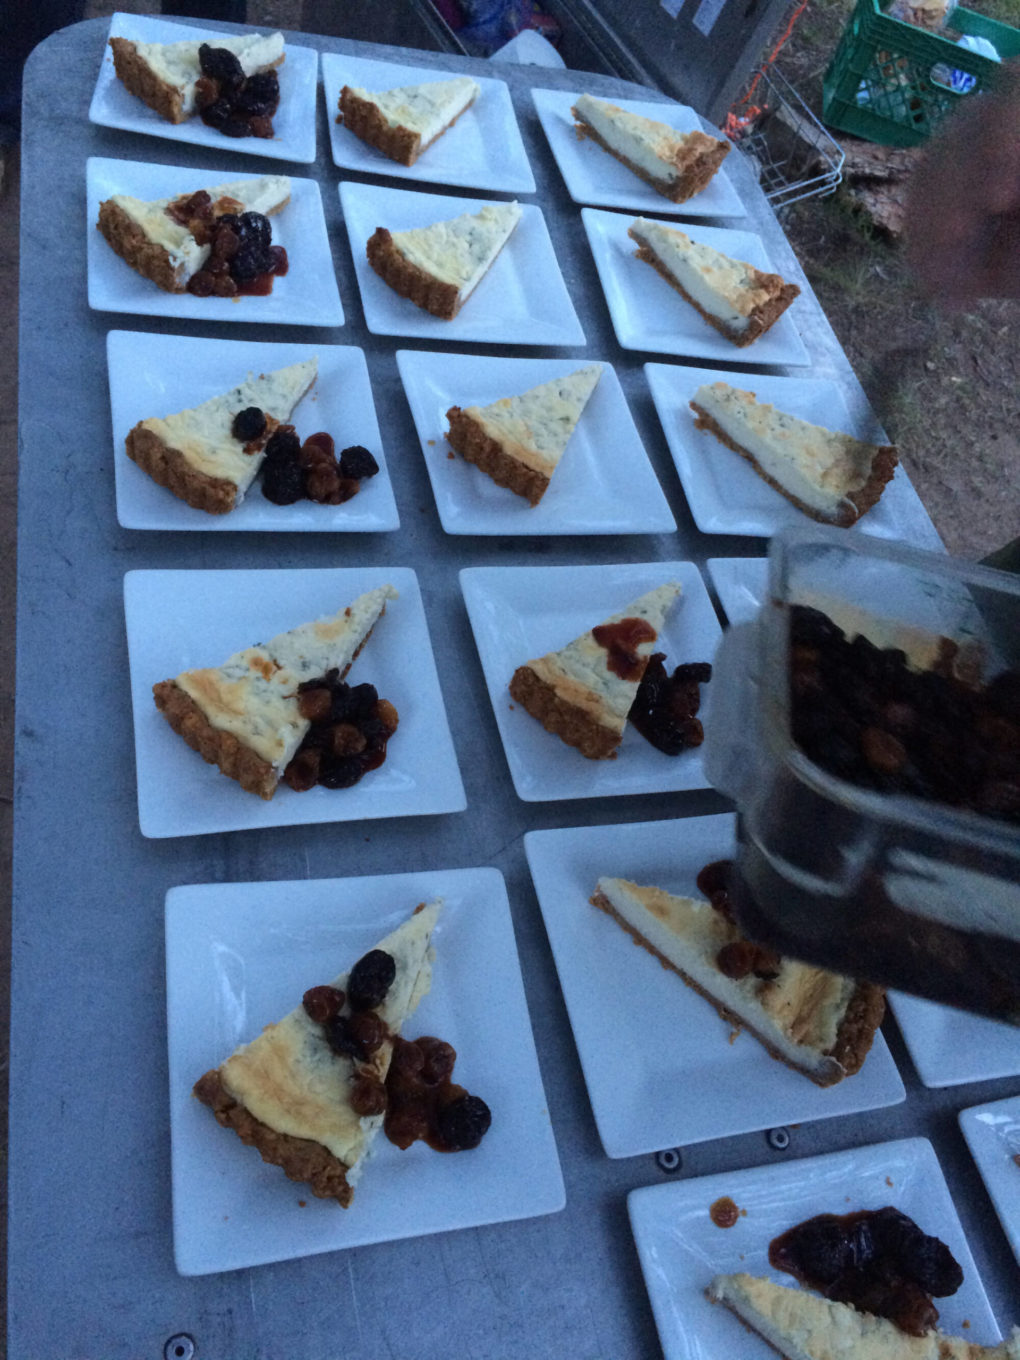 Fruit pie during a gourmet wine adventure in new mexico